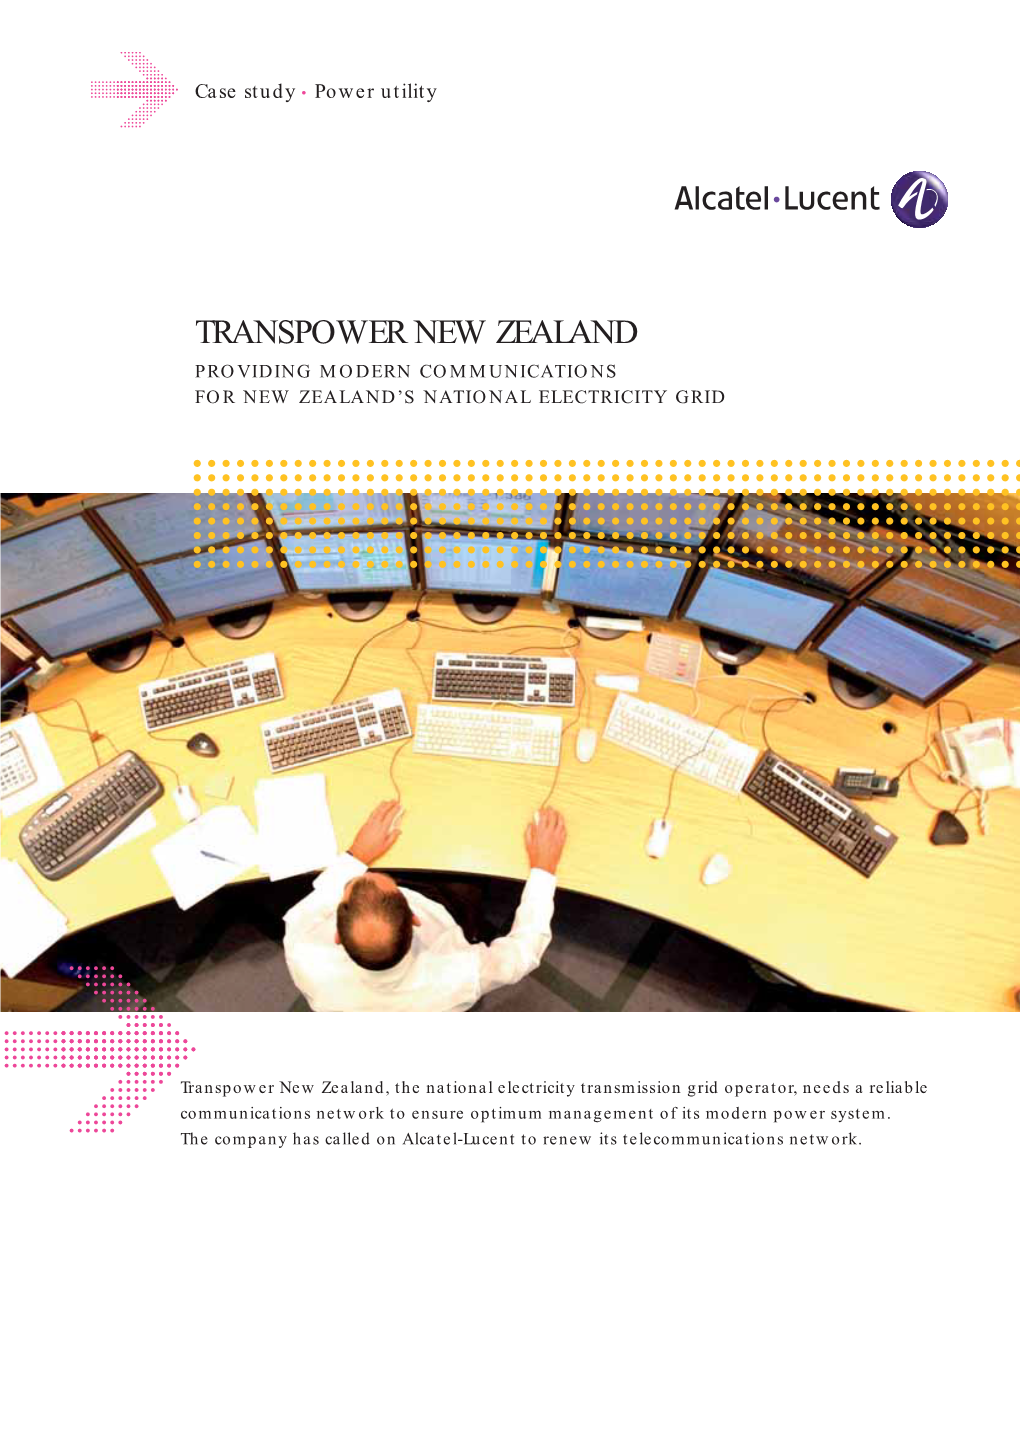 Transpower New Zealand Providing Modern Communications for New Zealand’S National Electricity Grid